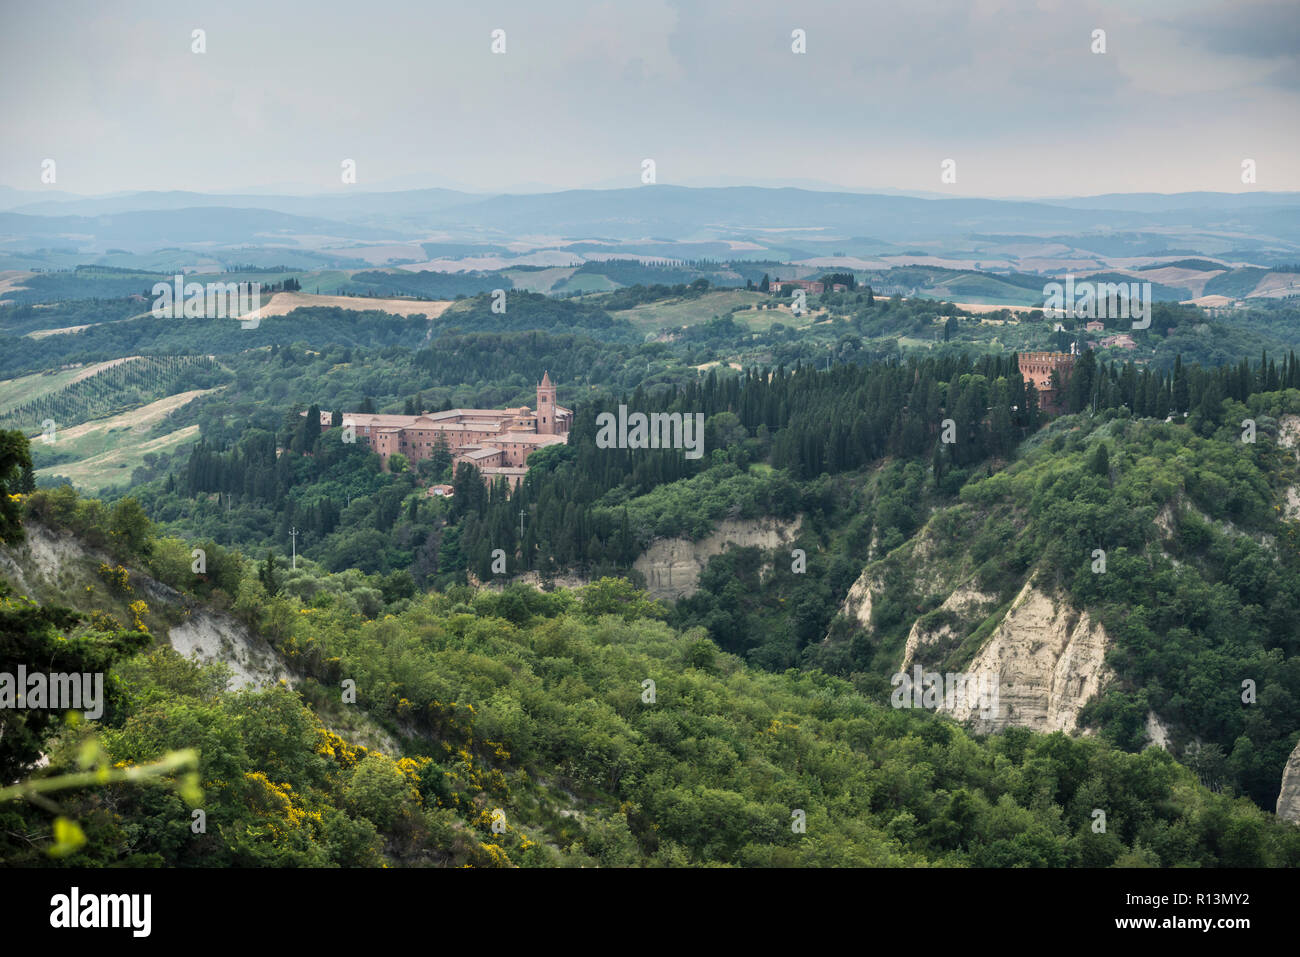 The Abbey of Monte Oliveto Maggiore (Benedictine monastery) and its surrounding areas, Tuscany, Italy Stock Photo